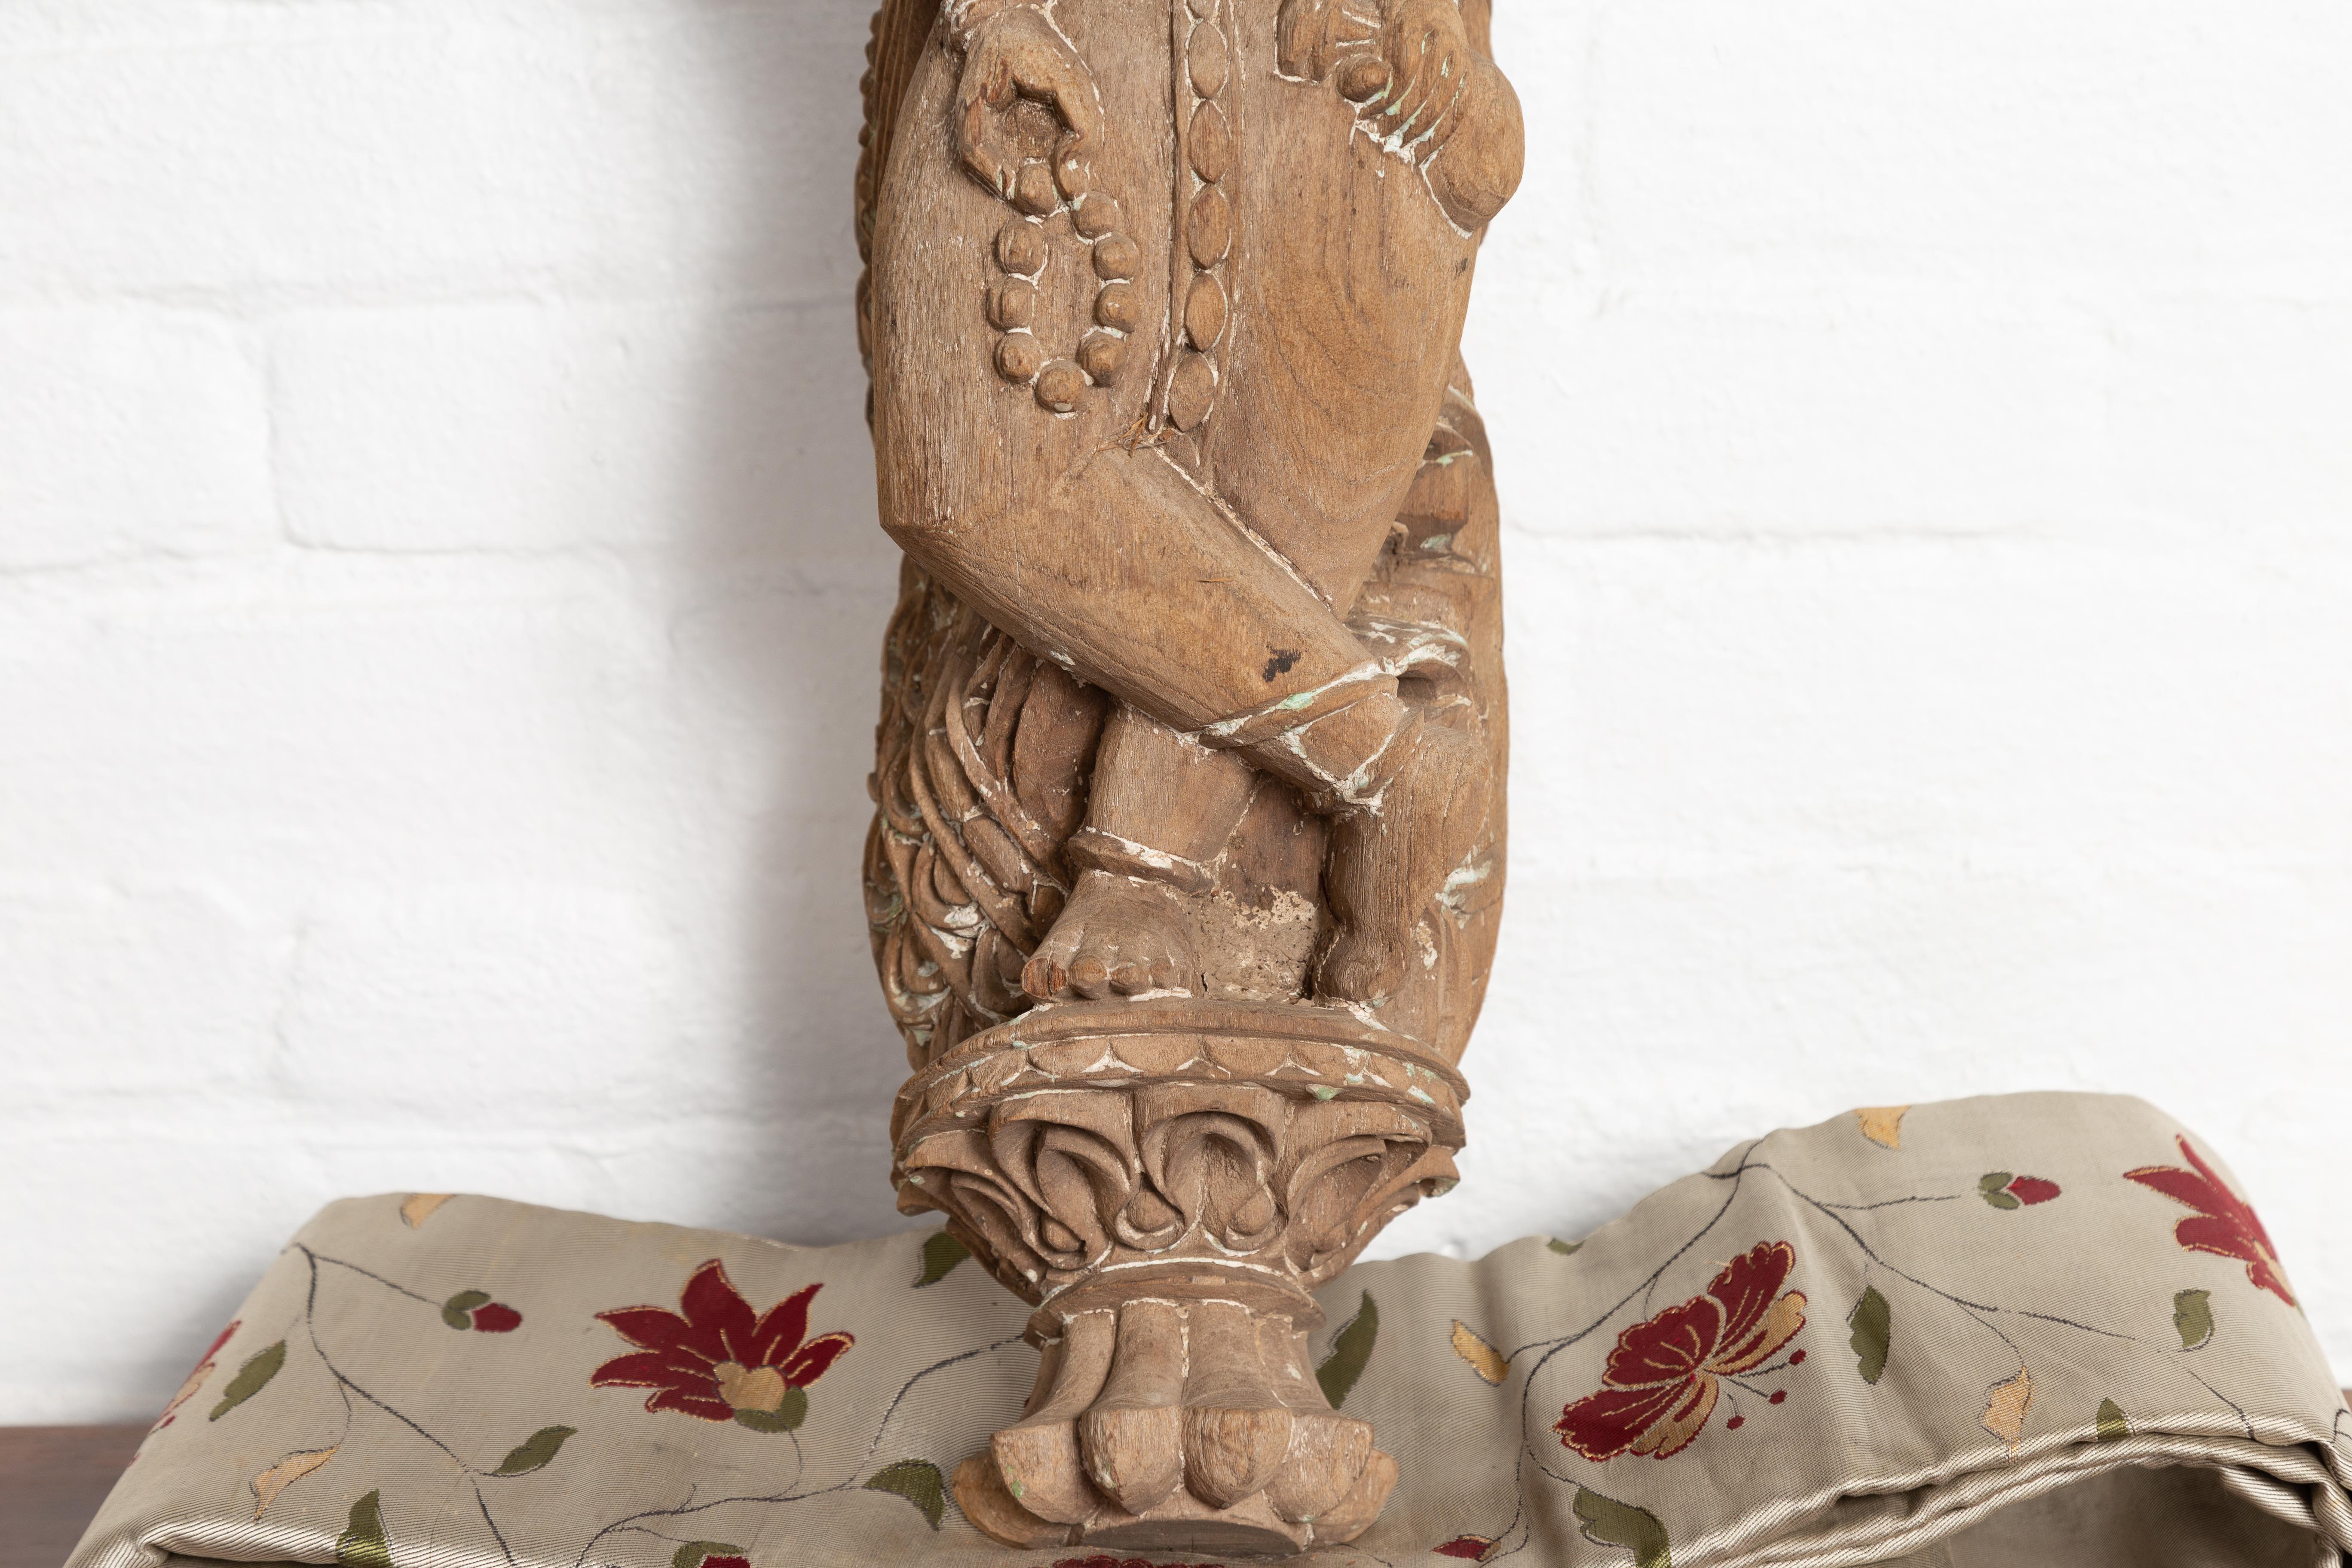 20th Century Hand Carved Indian Temple Carving from Gujarat Depicting the Hindu Deity Ganesha